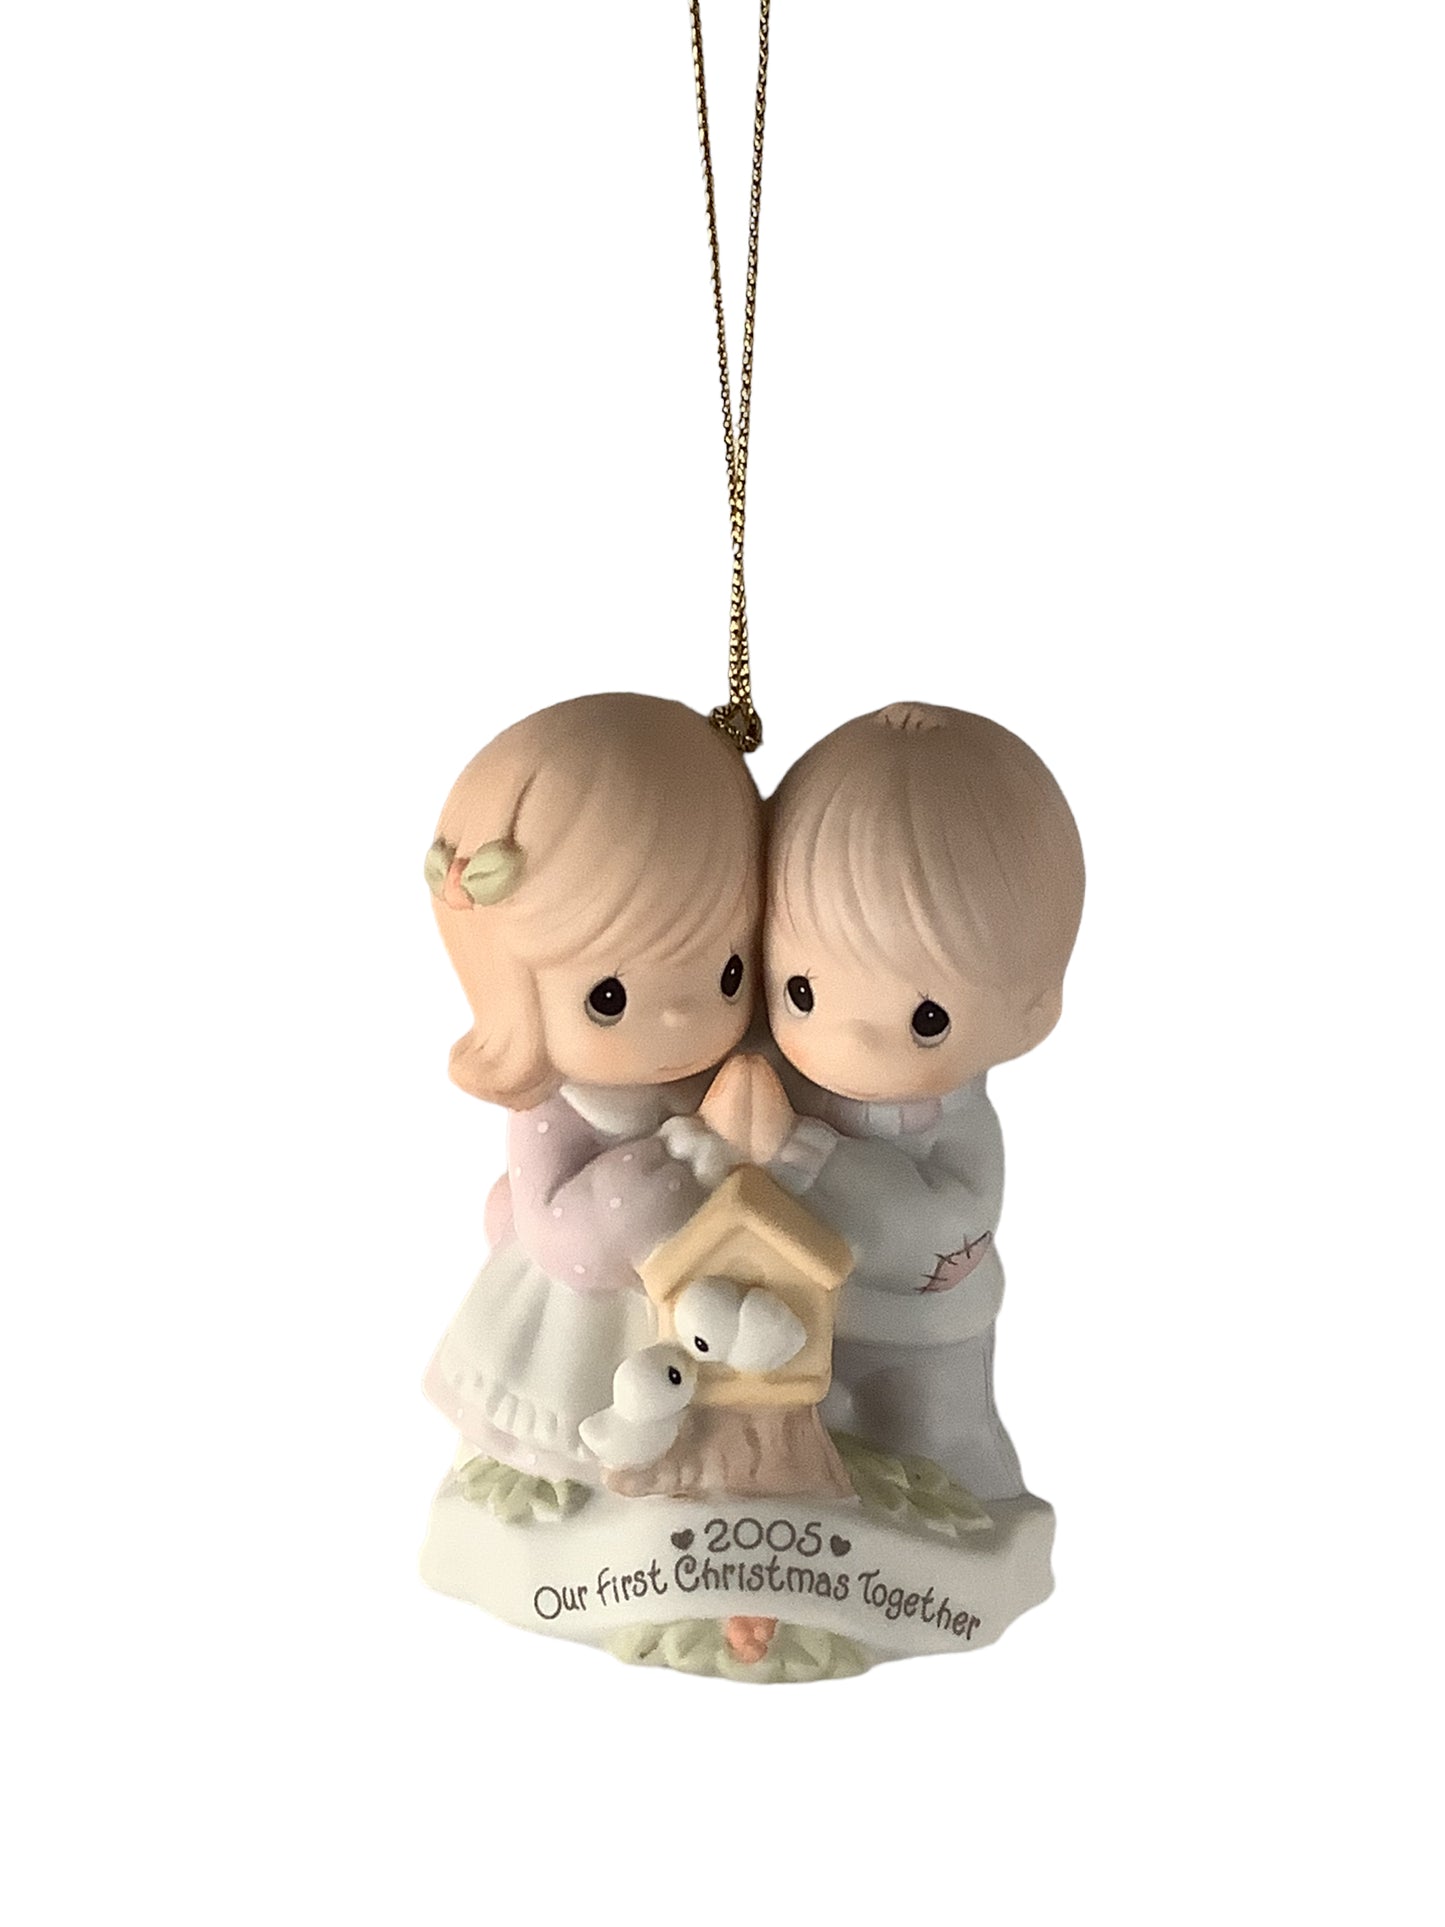 Our First Christmas Together 2005 - Precious Moment Ornament